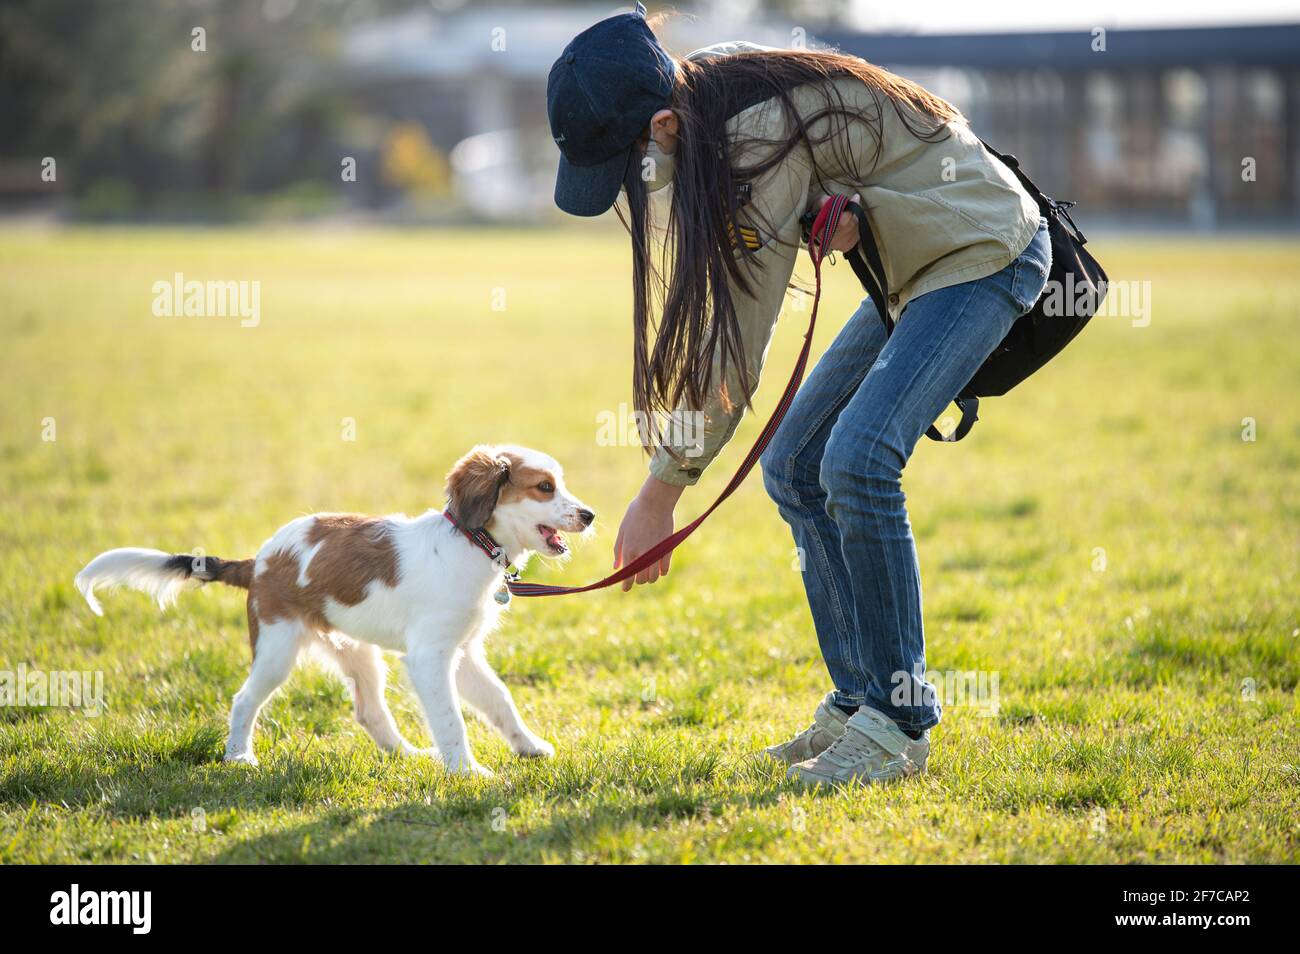 Young girl with a face mask playing with her dog in the park. Springtime. Stock Photo